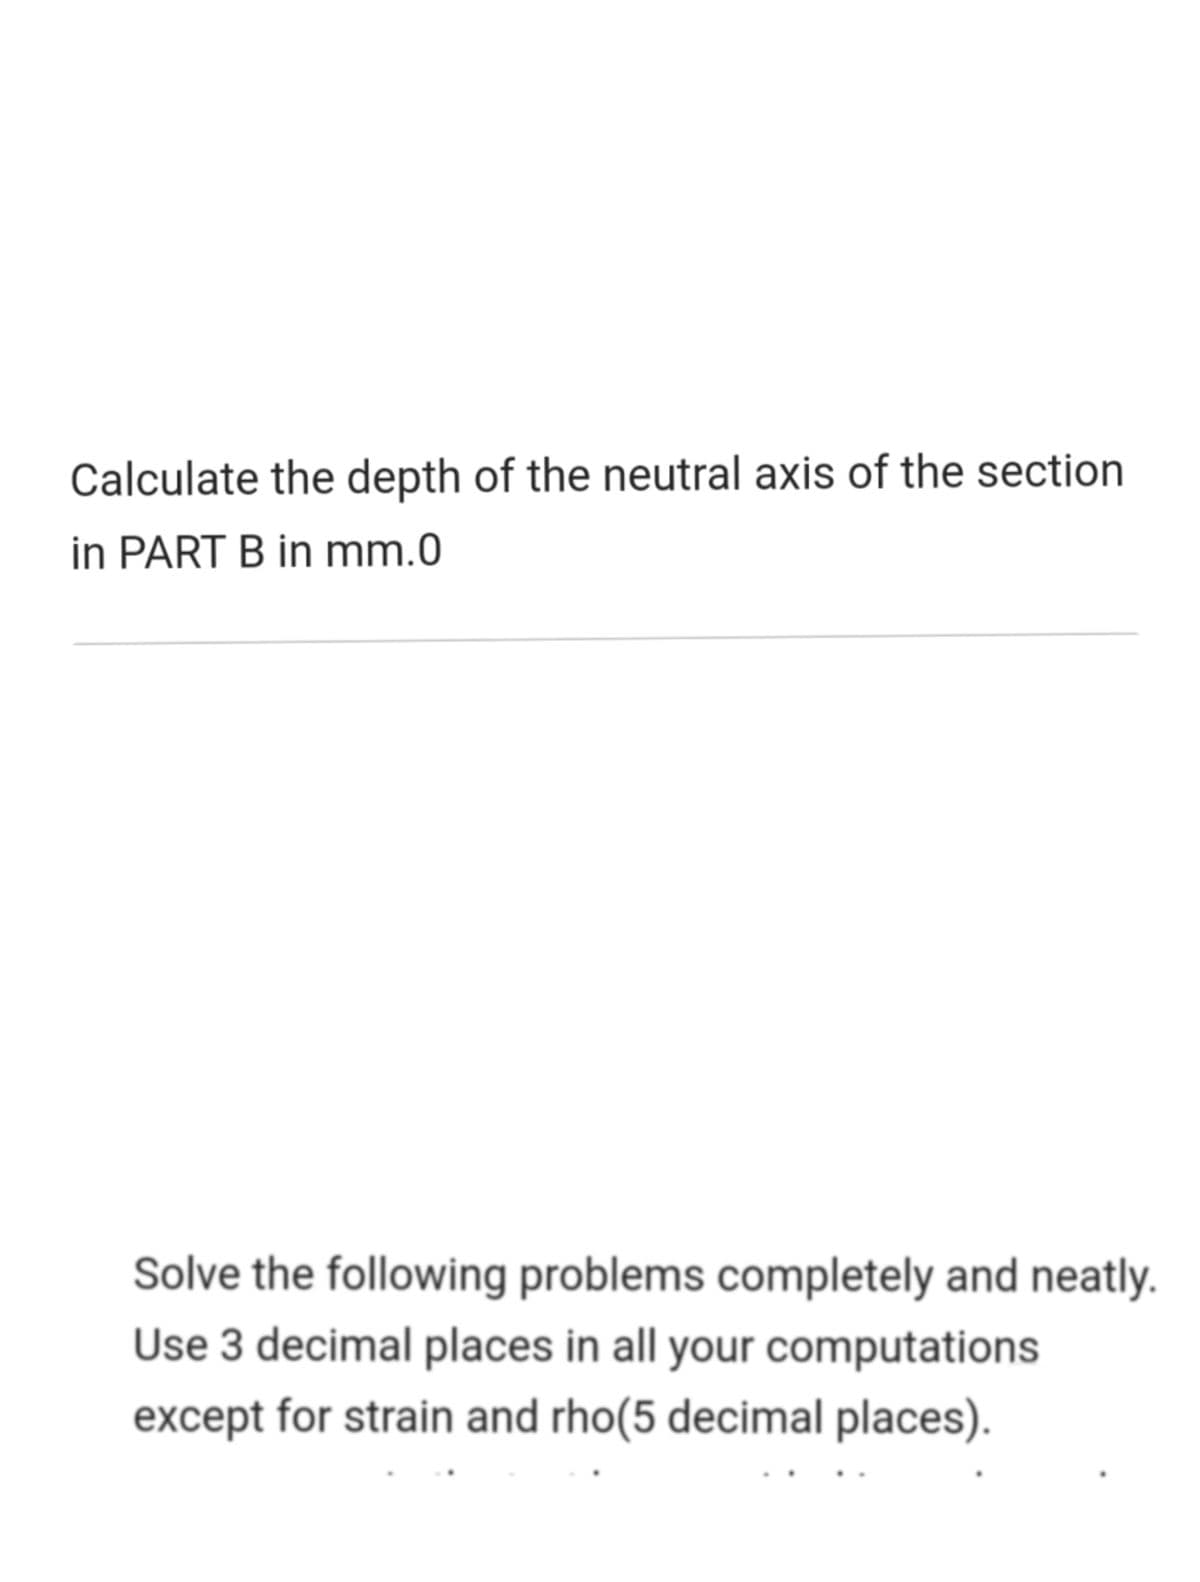 Calculate the depth of the neutral axis of the section
in PART B in mm.0
Solve the following problems completely and neatly.
Use 3 decimal places in all your computations
except for strain and rho(5 decimal places).